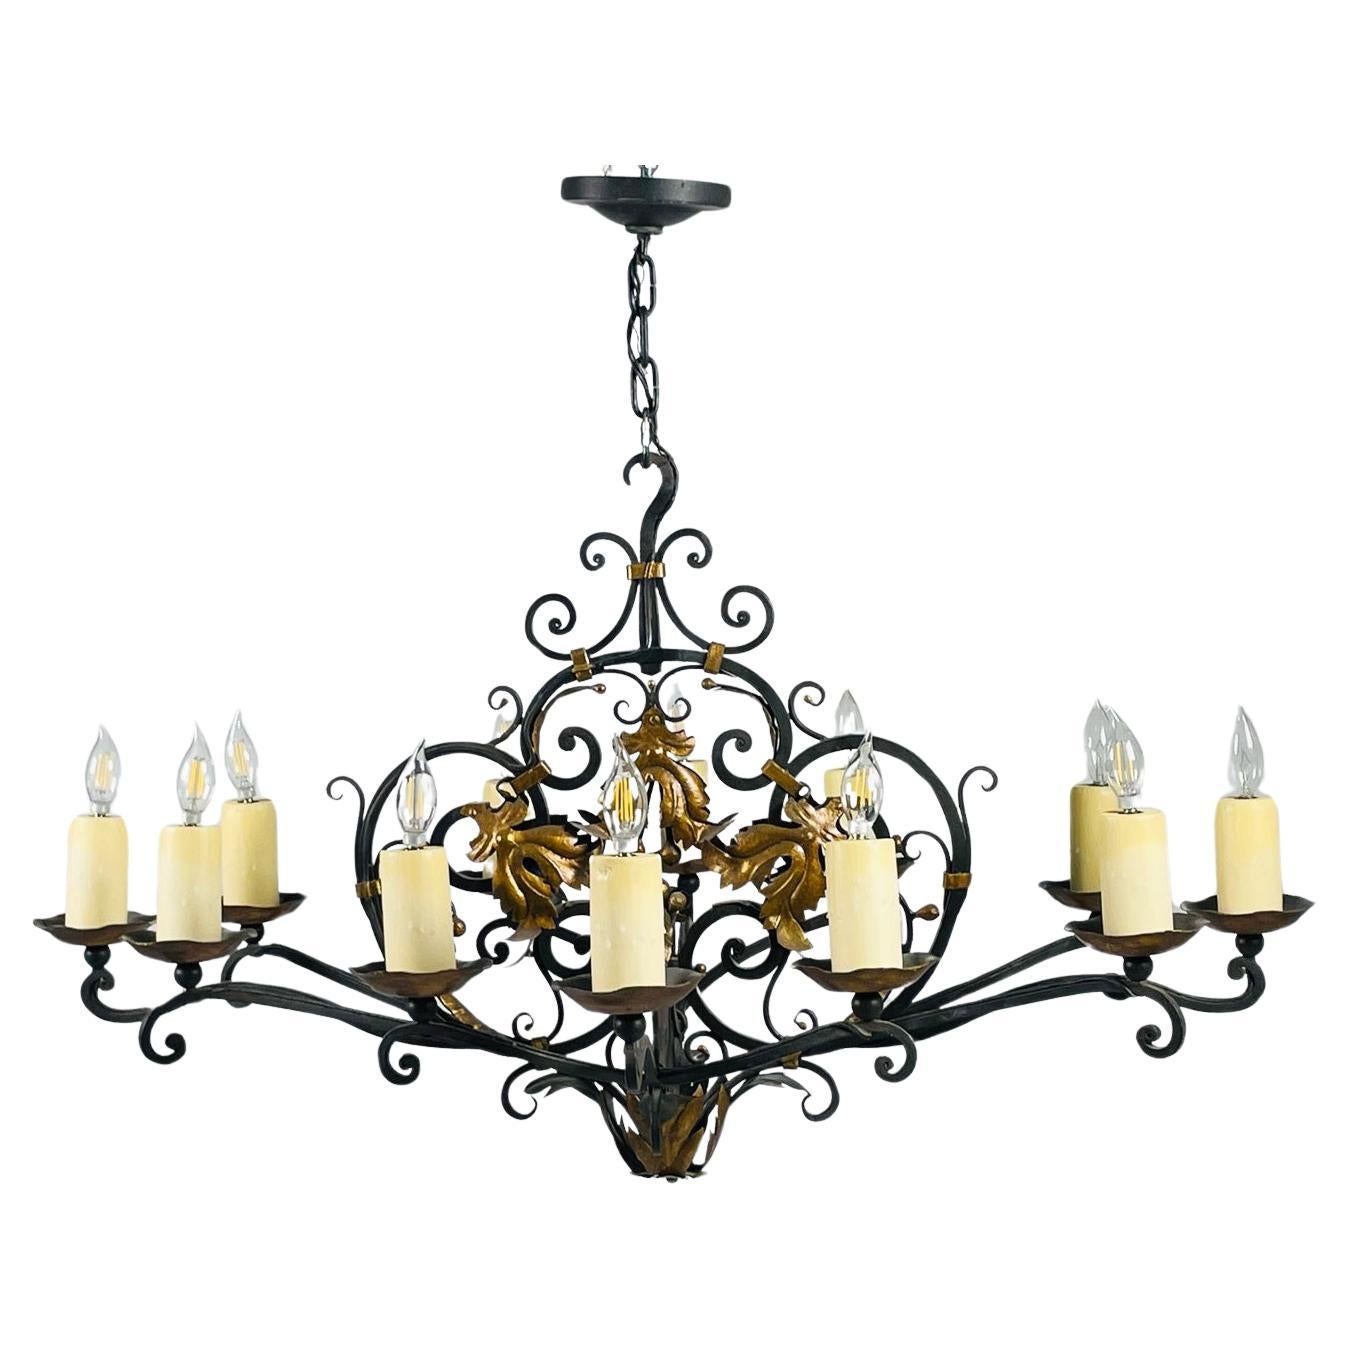 Wrought Iron & Gold Gilt Chandelier by Paul Ferrante, USA 2016 For Sale